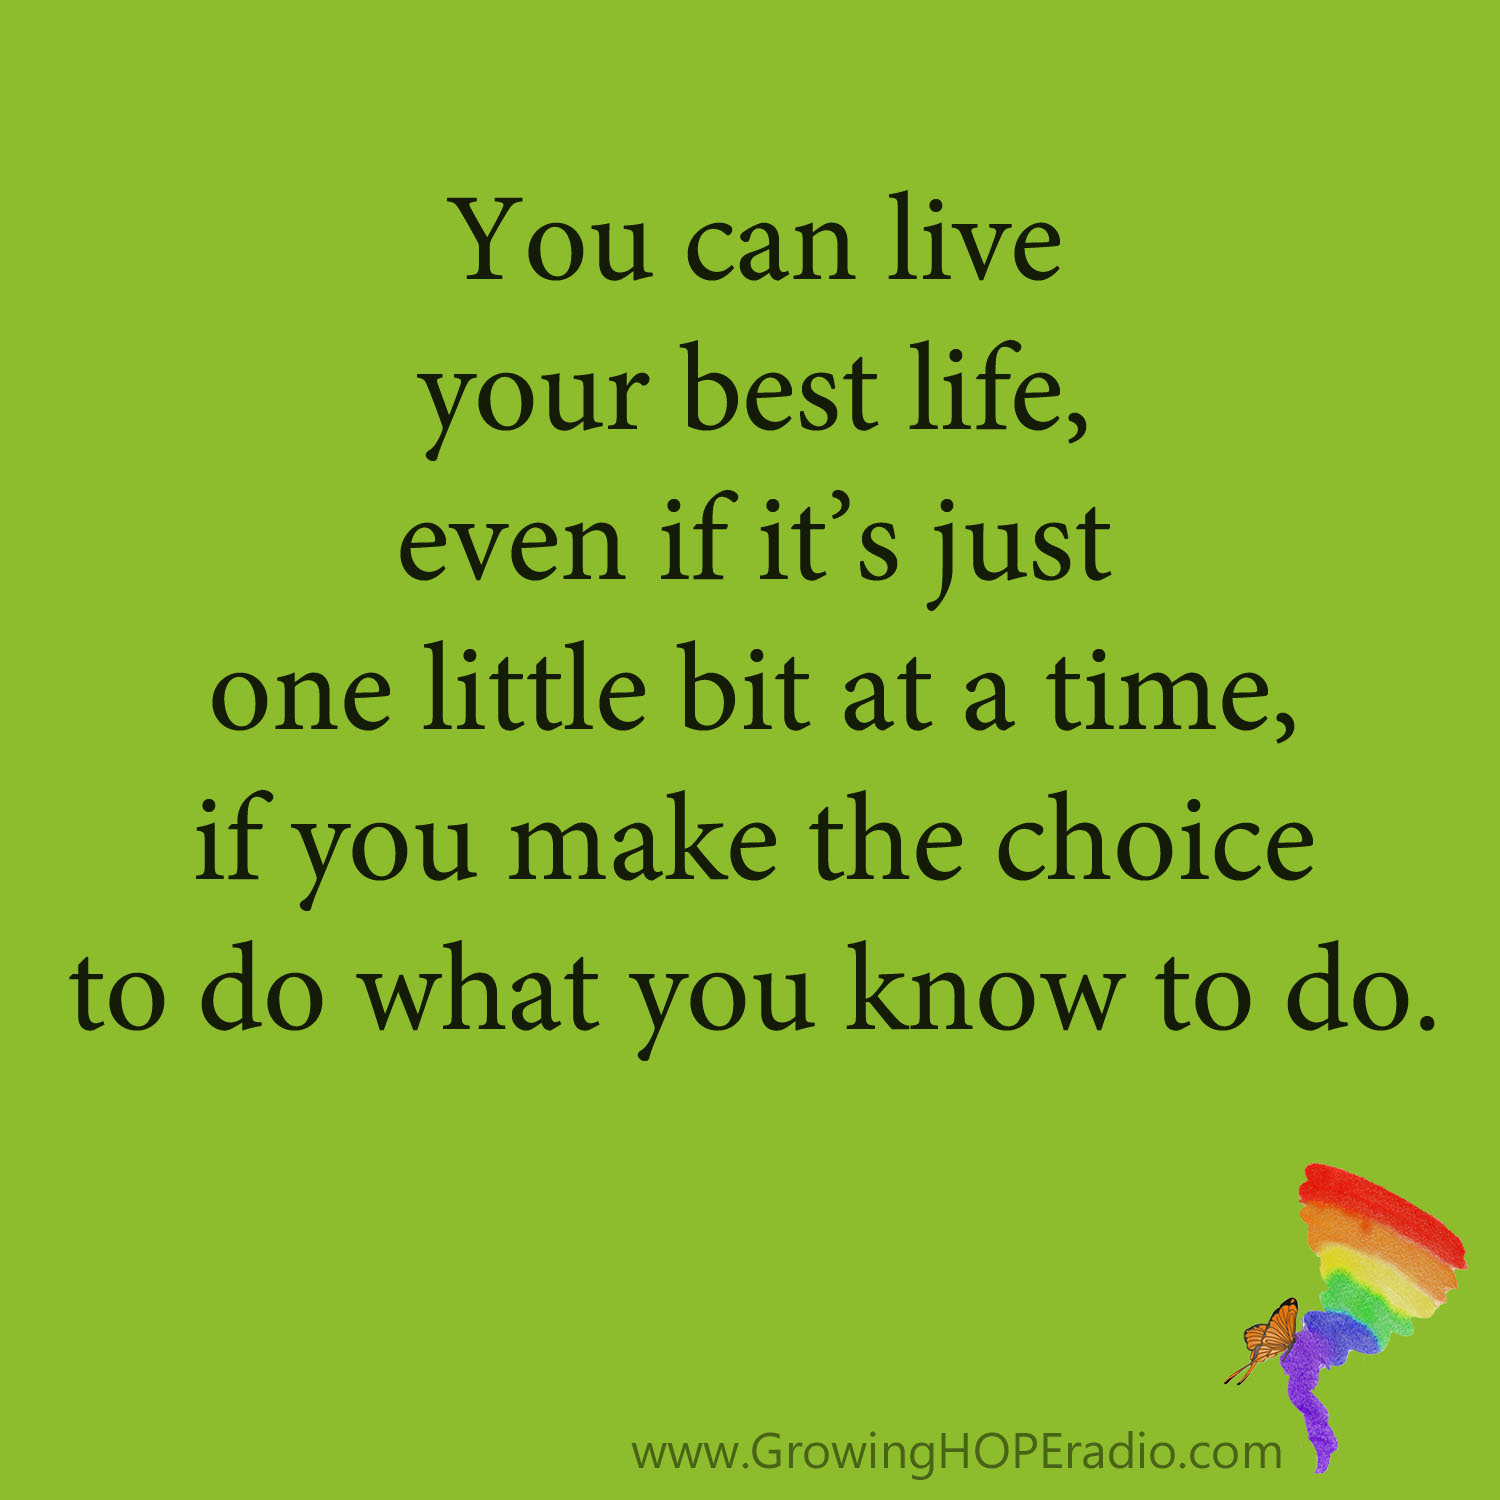 #GrowingHOPE daily quote - live your best life